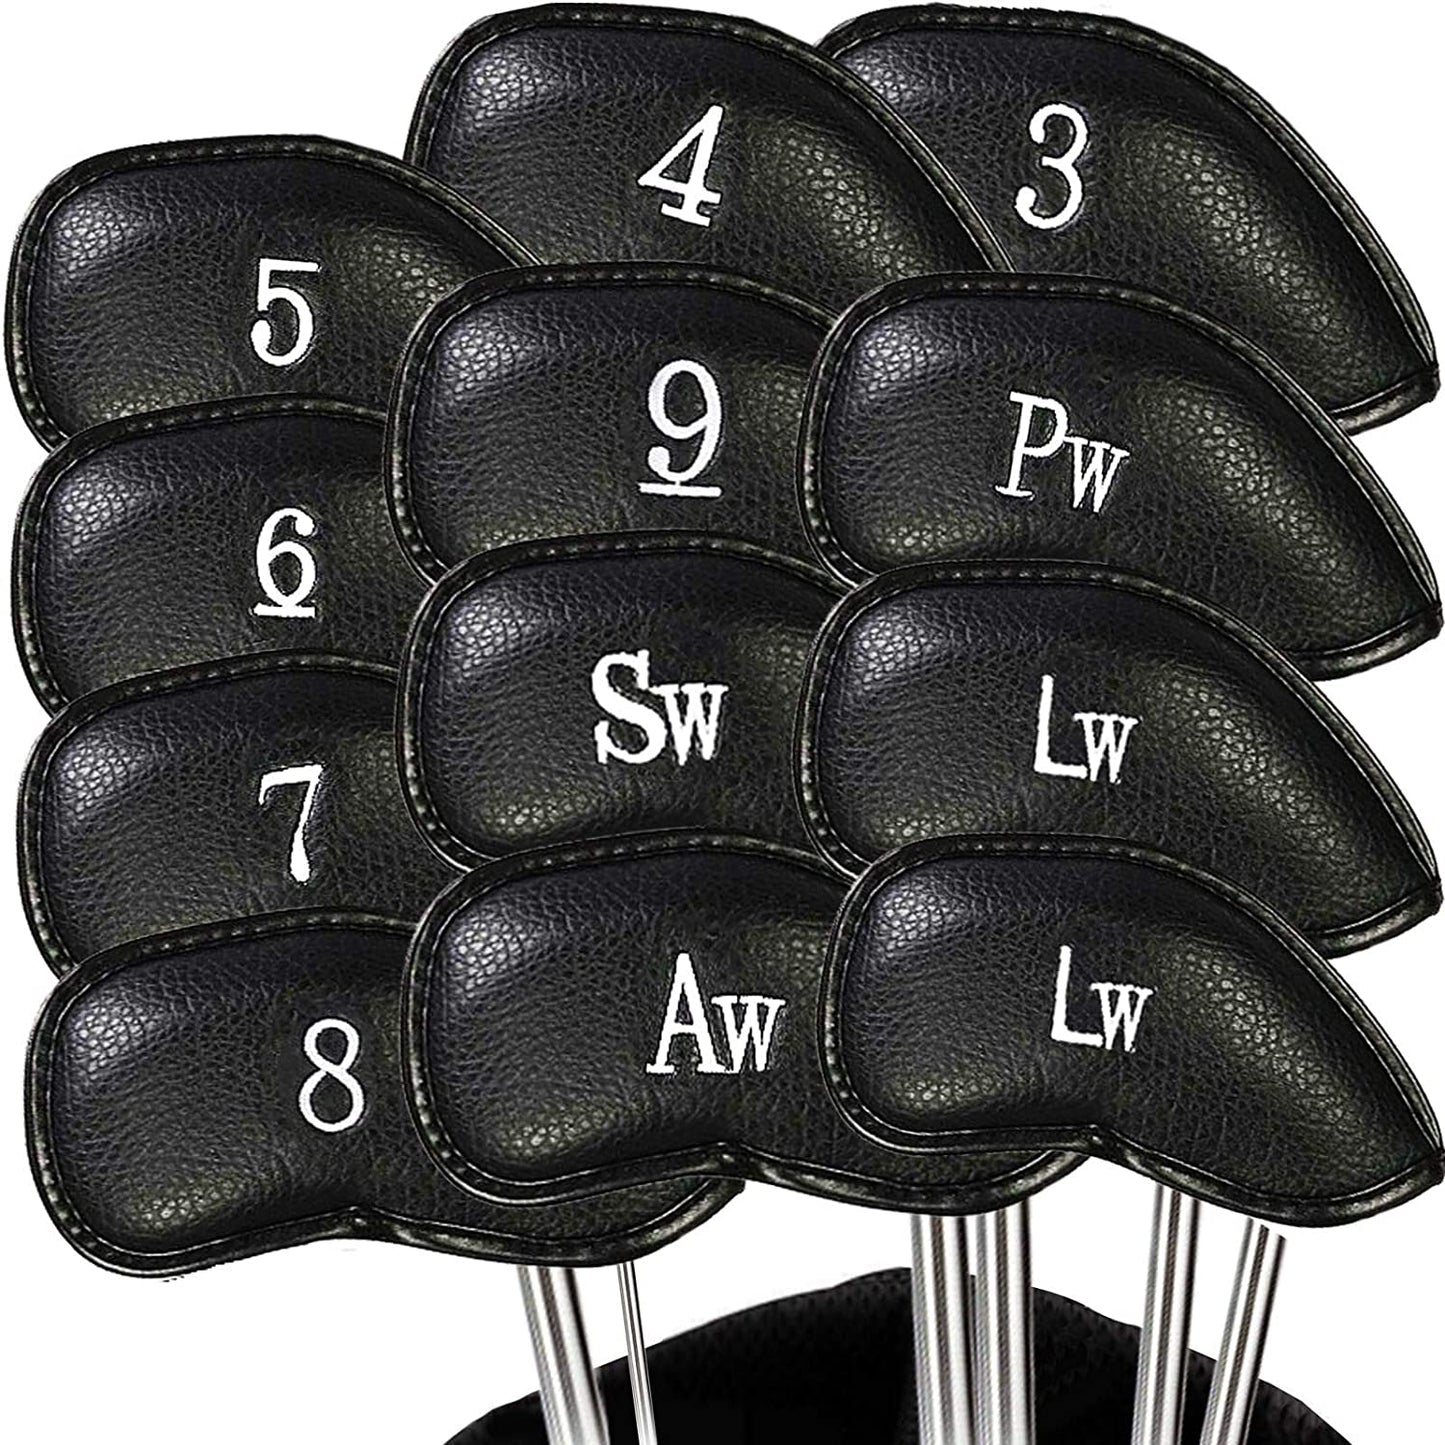 8/12Pcs Numbered Golf Iron Cover Magnetic Synthetic Leather Wedge Covers Set 48 50 52 54 56 58 60 62 - onestopmegamall23